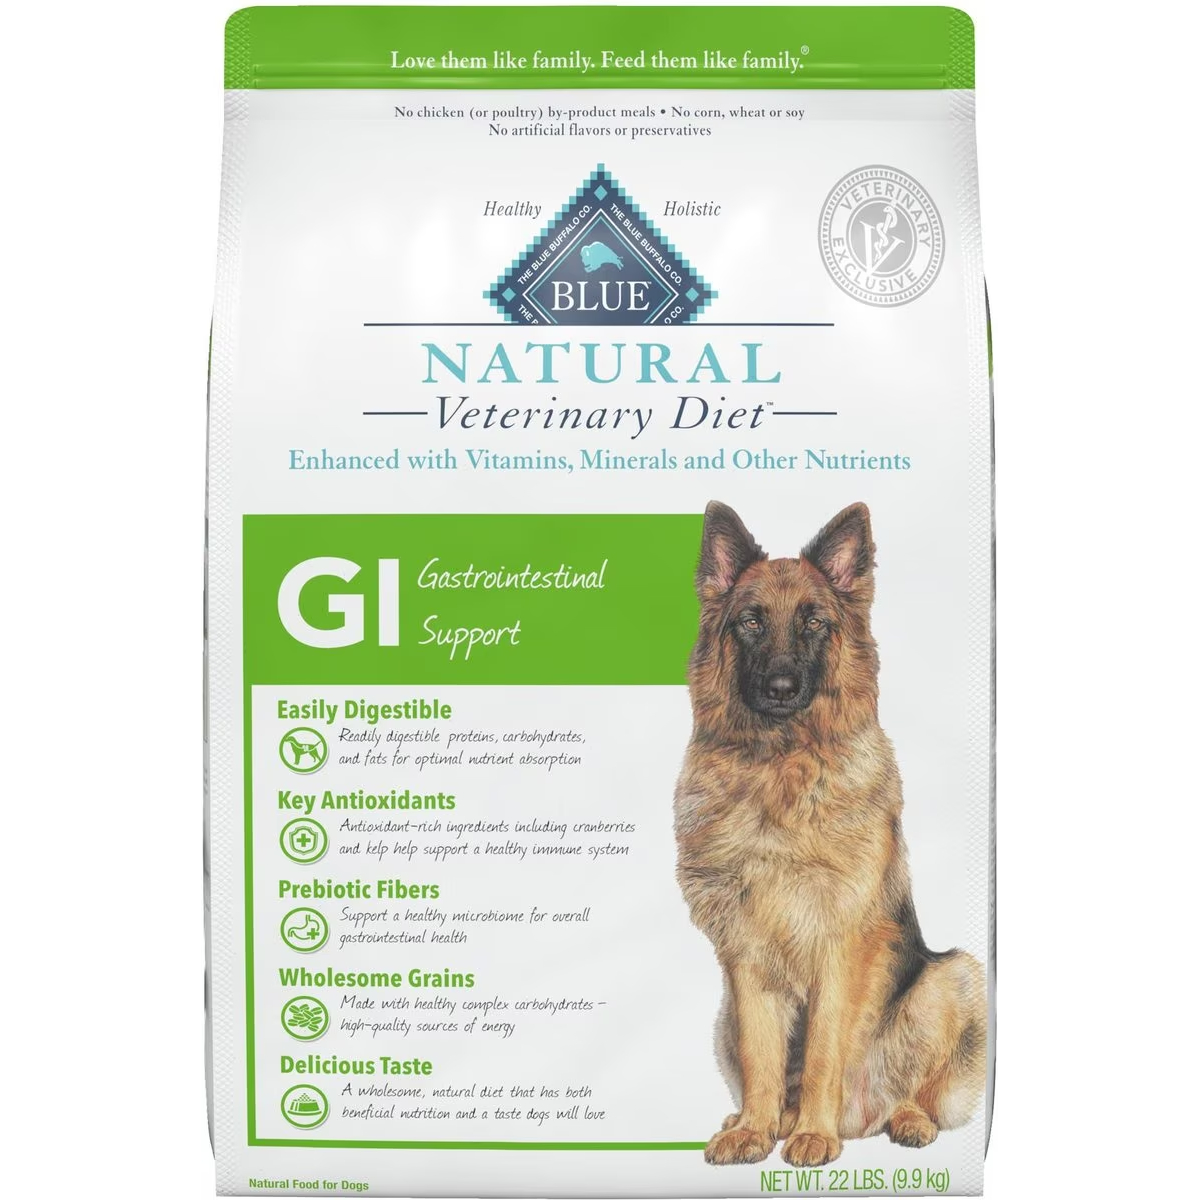 Blue Buffalo Natural Veterinary Diet GI Gastrointestinal Support Dry Dog Food